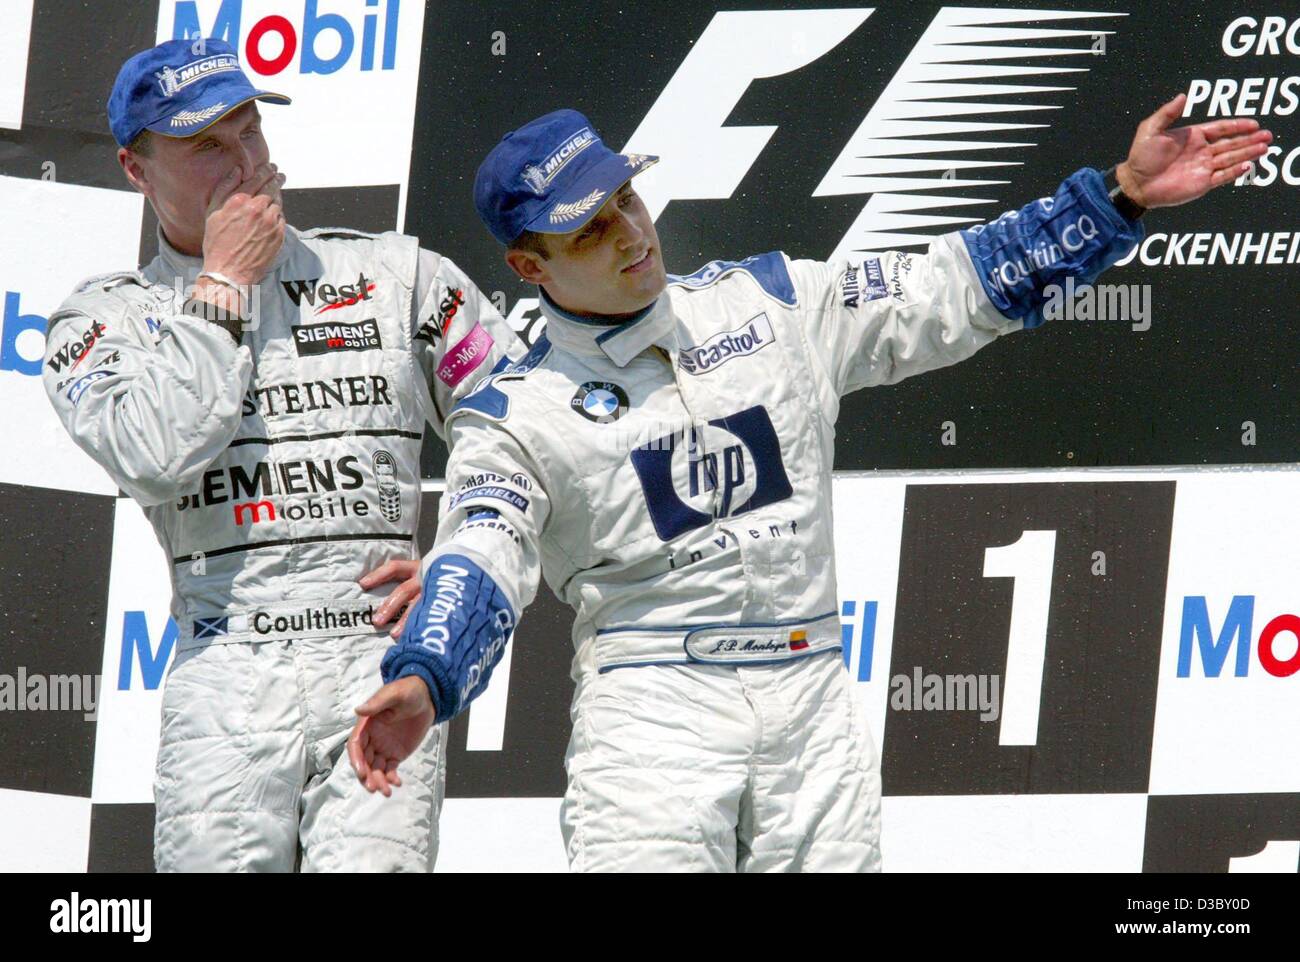 (dpa) - Colombian Juan Pablo Montoya of BMW-Williams (R) celebrates on the podium with second-placed David Coulthard of McLaren-Mercedes (L) after winning the Formula One Grand Prix of Germany at the Hockenheim race track in Hockenheim, Germany, 3 August 2003. With 65 points Montoya ranks now on 2nd Stock Photo